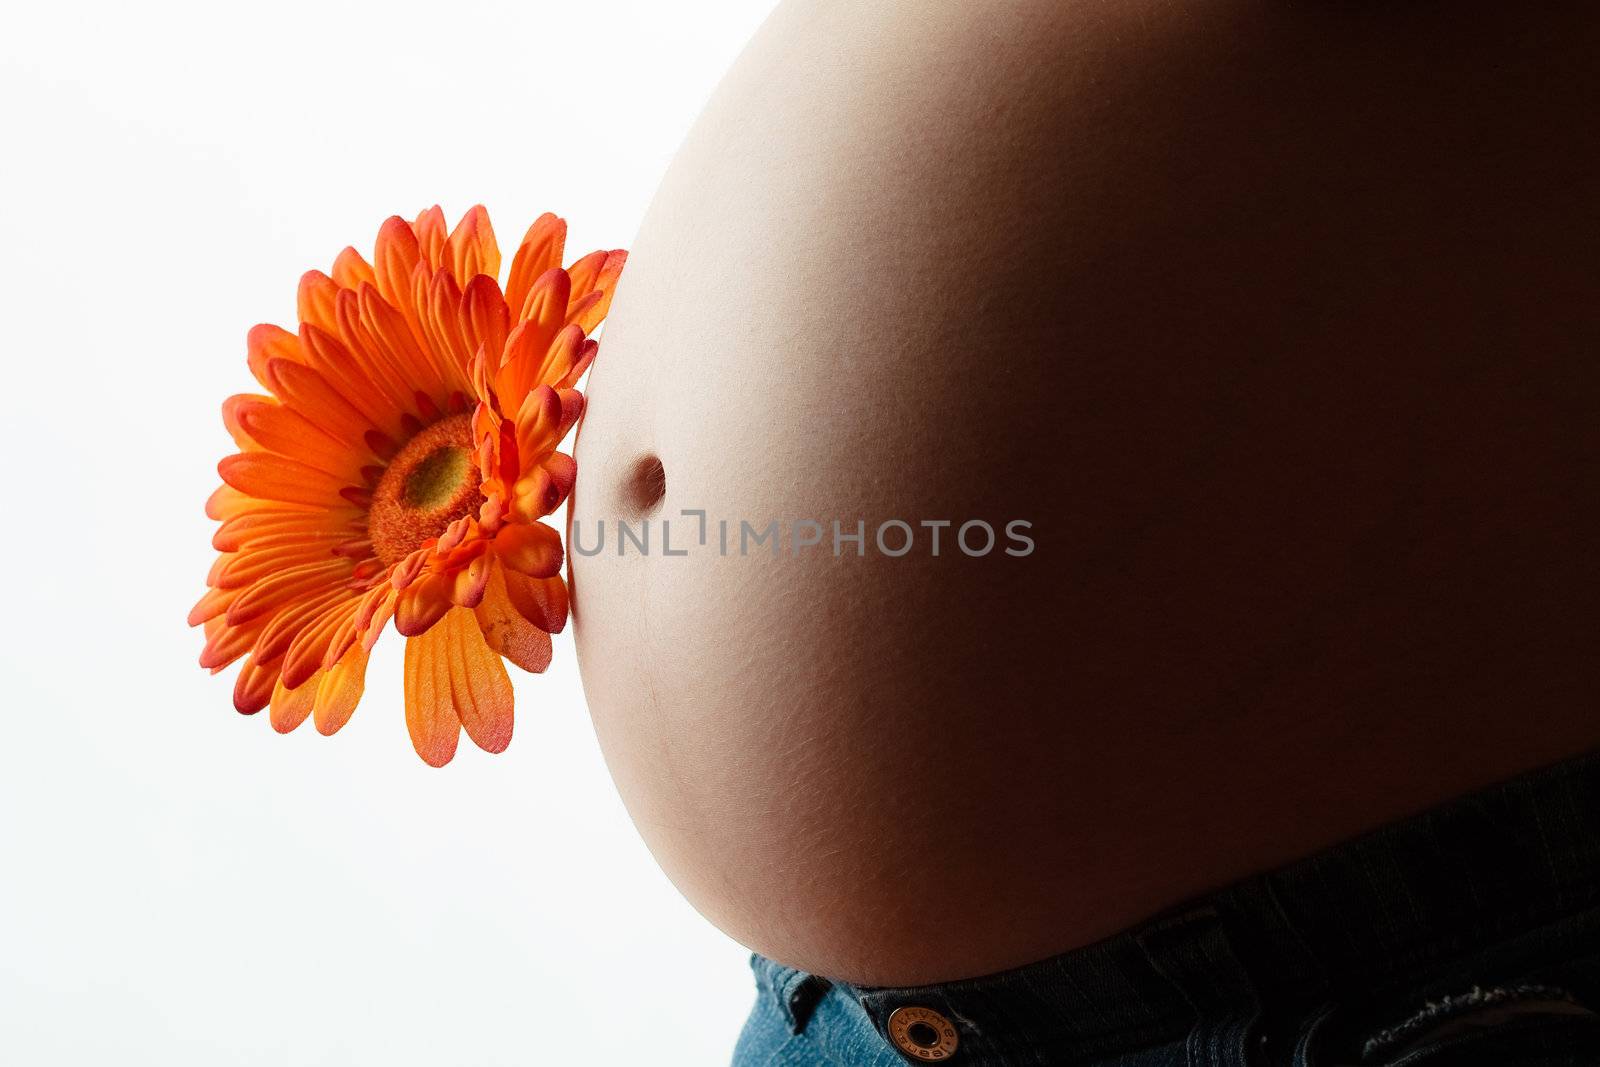 Pregnant belly by Talanis